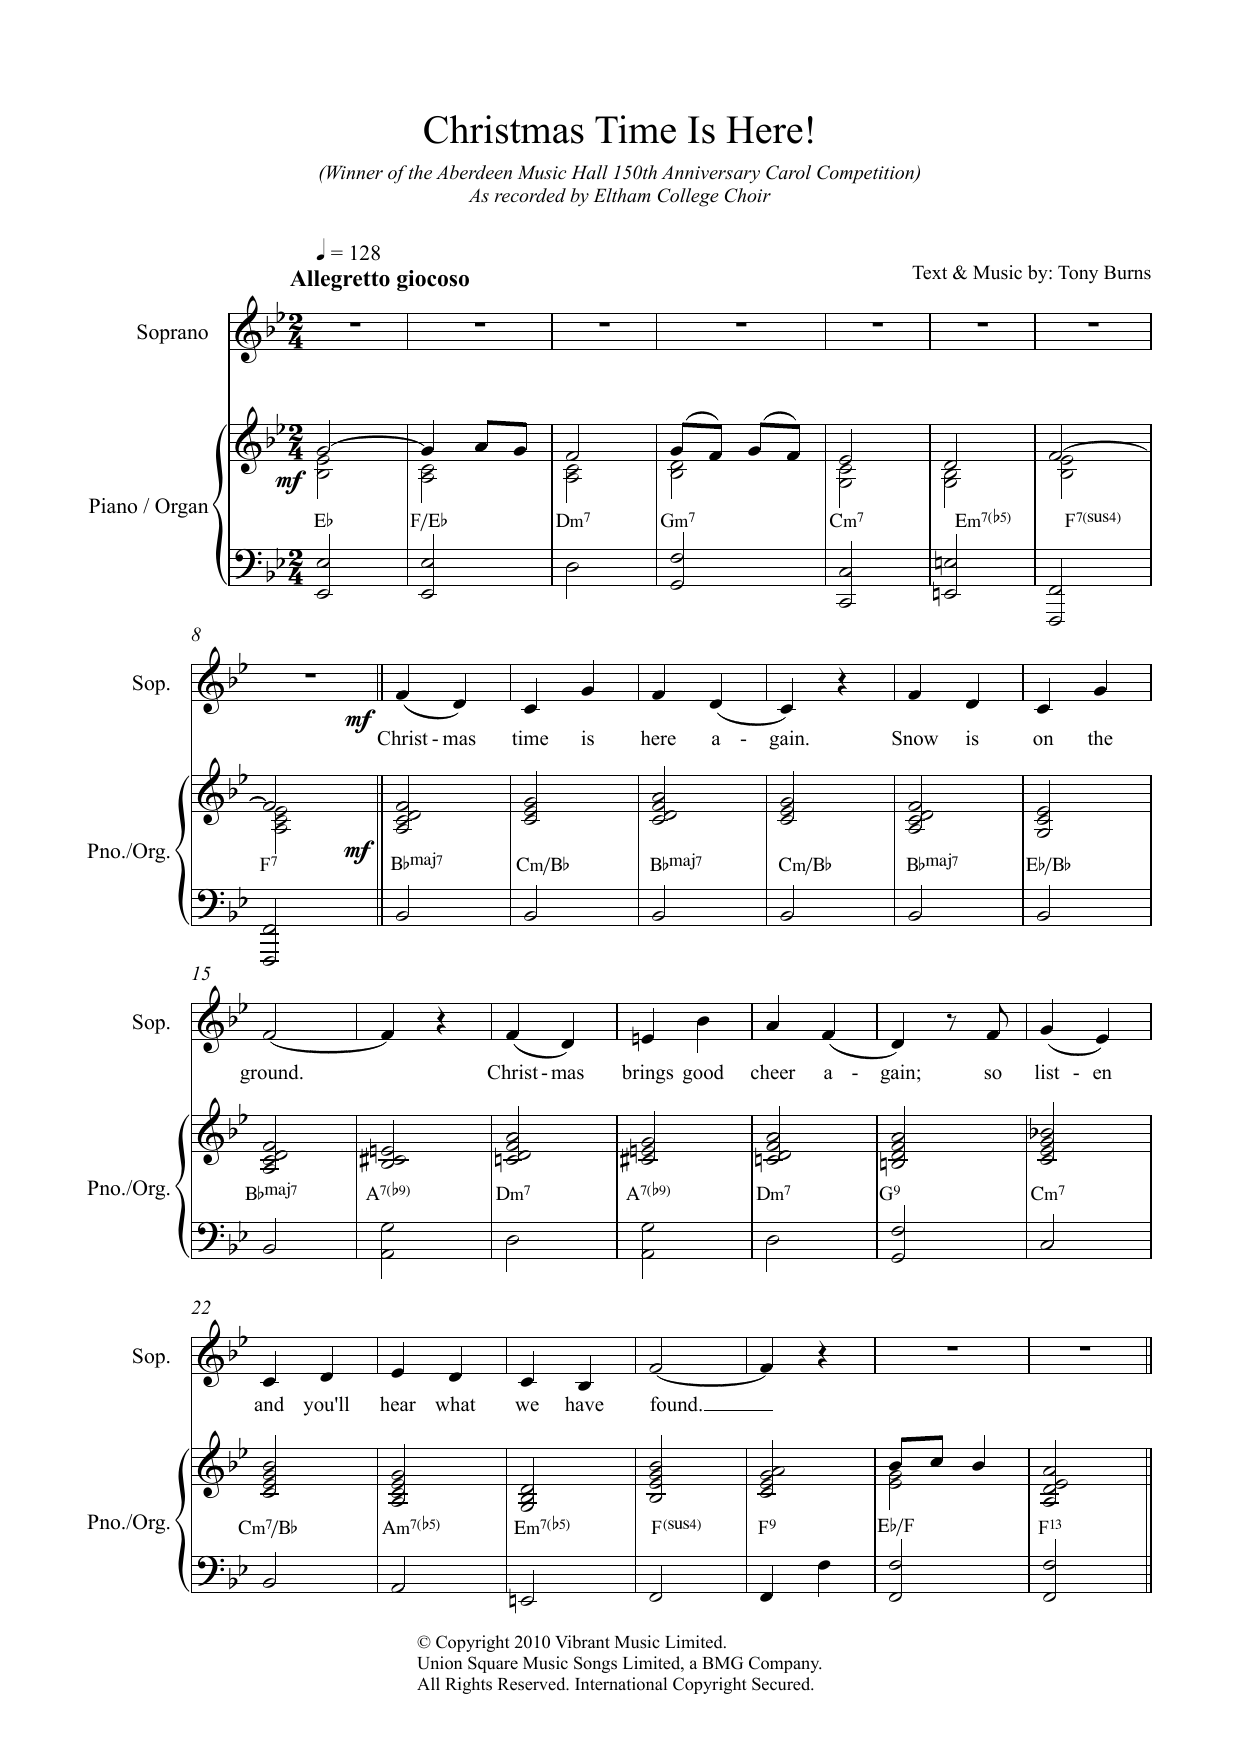 Download Tony Burns Christmas Time Is Here! Sheet Music